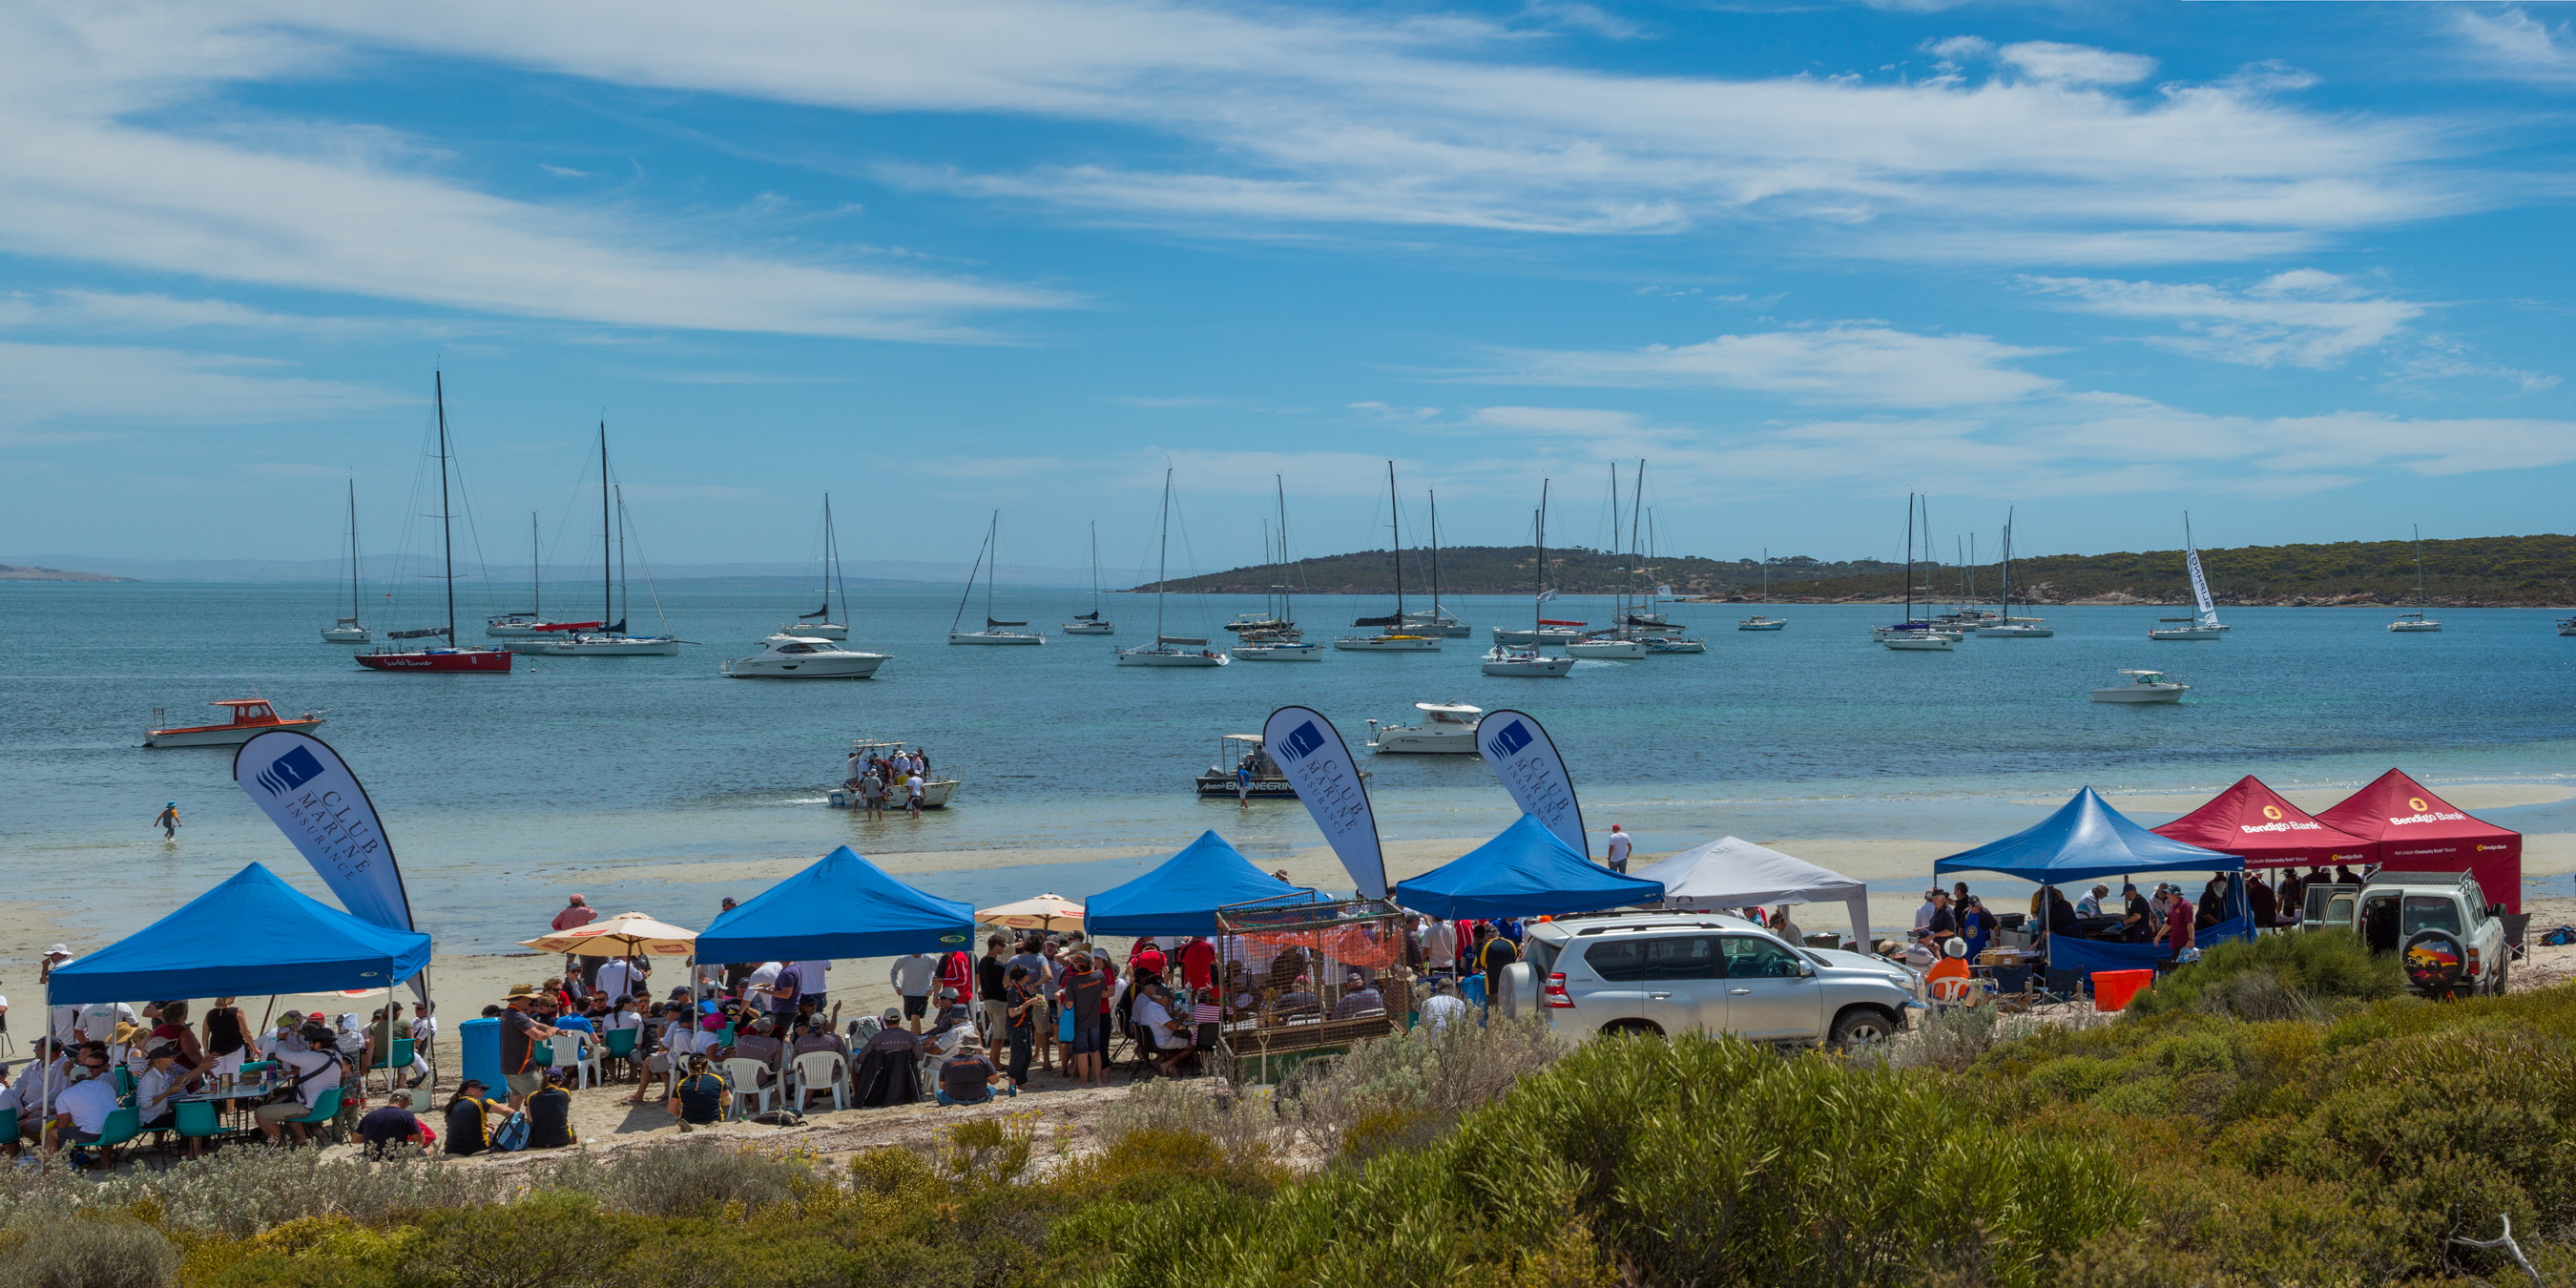 The famous Meggas BBQ event is held on the Wednesday of Lincoln Week each year at Spalding Cove. Photo: Take 2 Photography